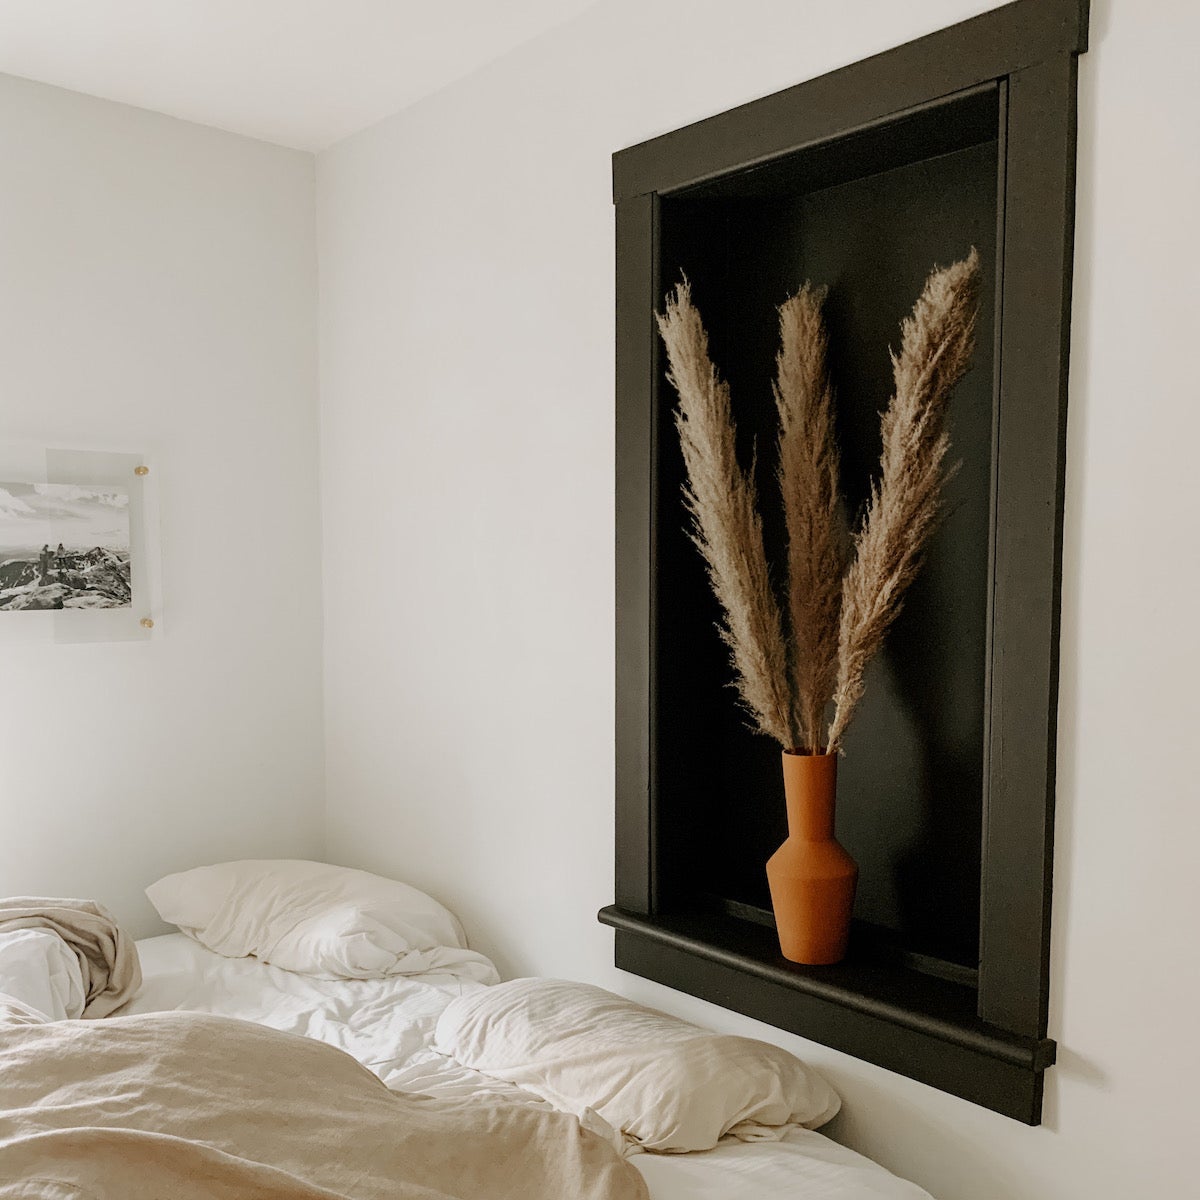 A bedroom with dried florals in a vase on one wall and an acrylic frame on the other.